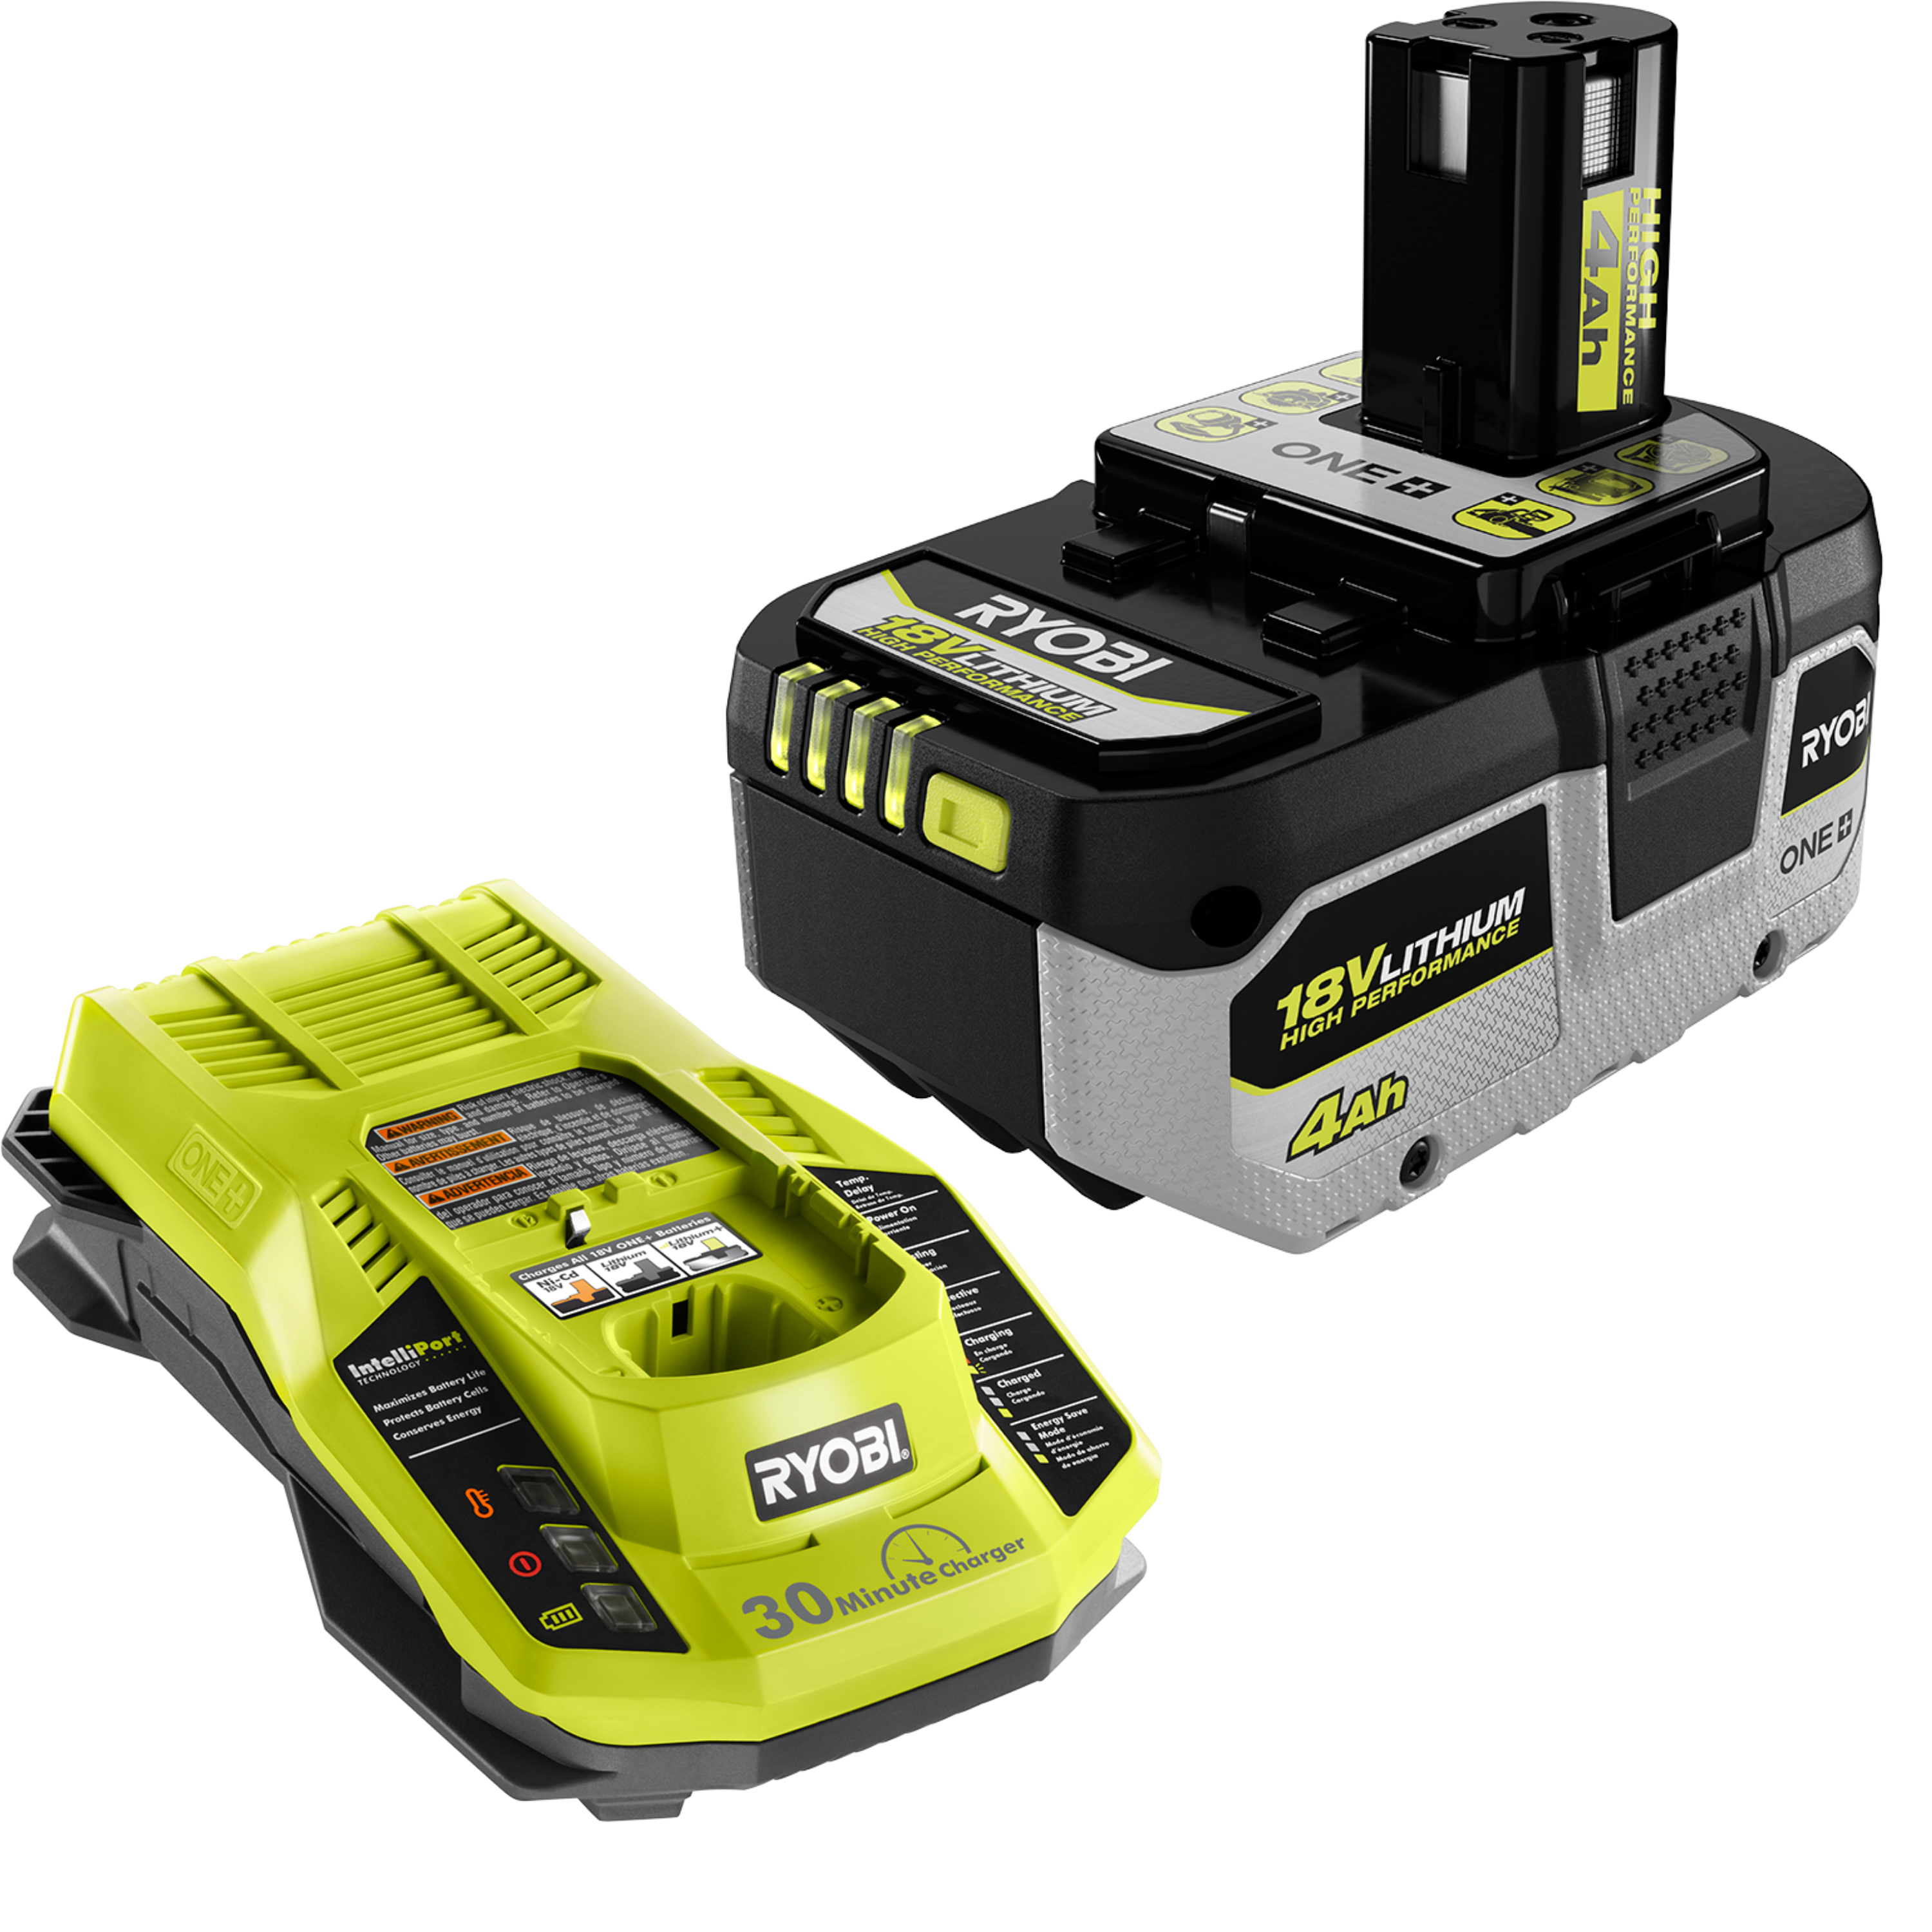 Ryobi ONE+ 18V Lithium-Ion 4.0 Ah Battery (2-Pack) and Charger Kit